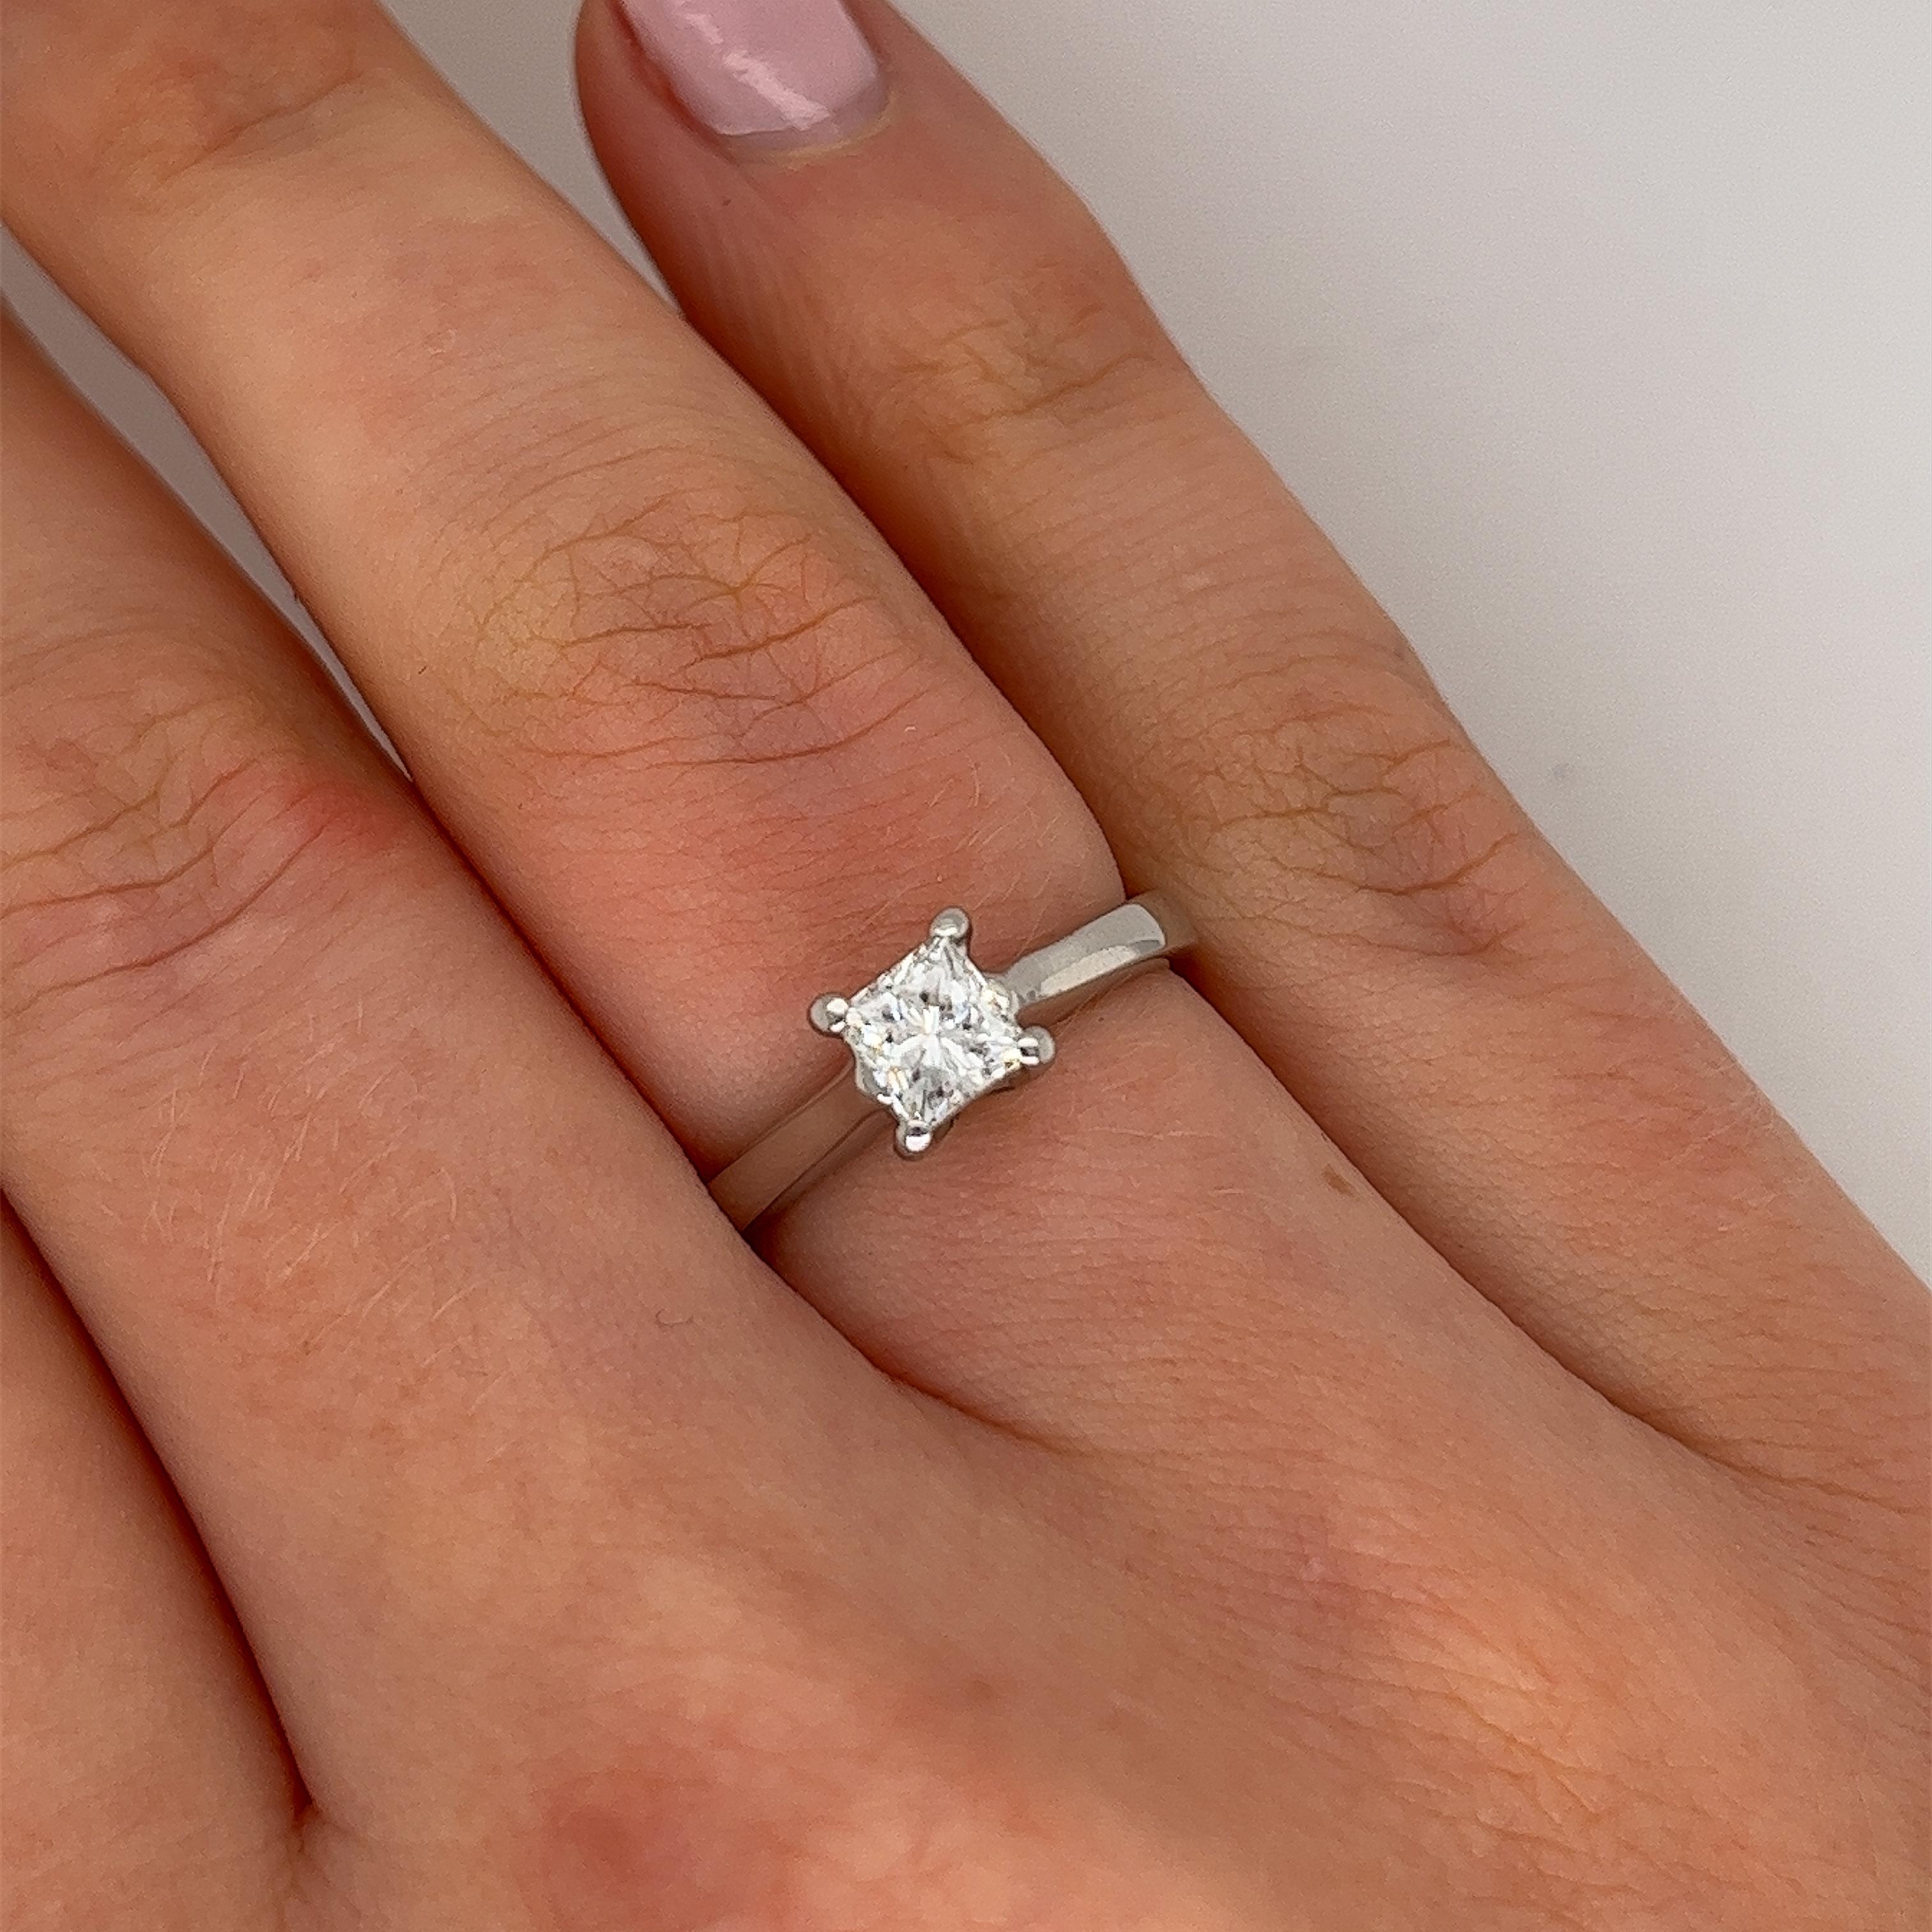 18ct White Gold Solitaire Diamond Ring Set With 0.45ct Princess Cut Diamond In Excellent Condition For Sale In London, GB